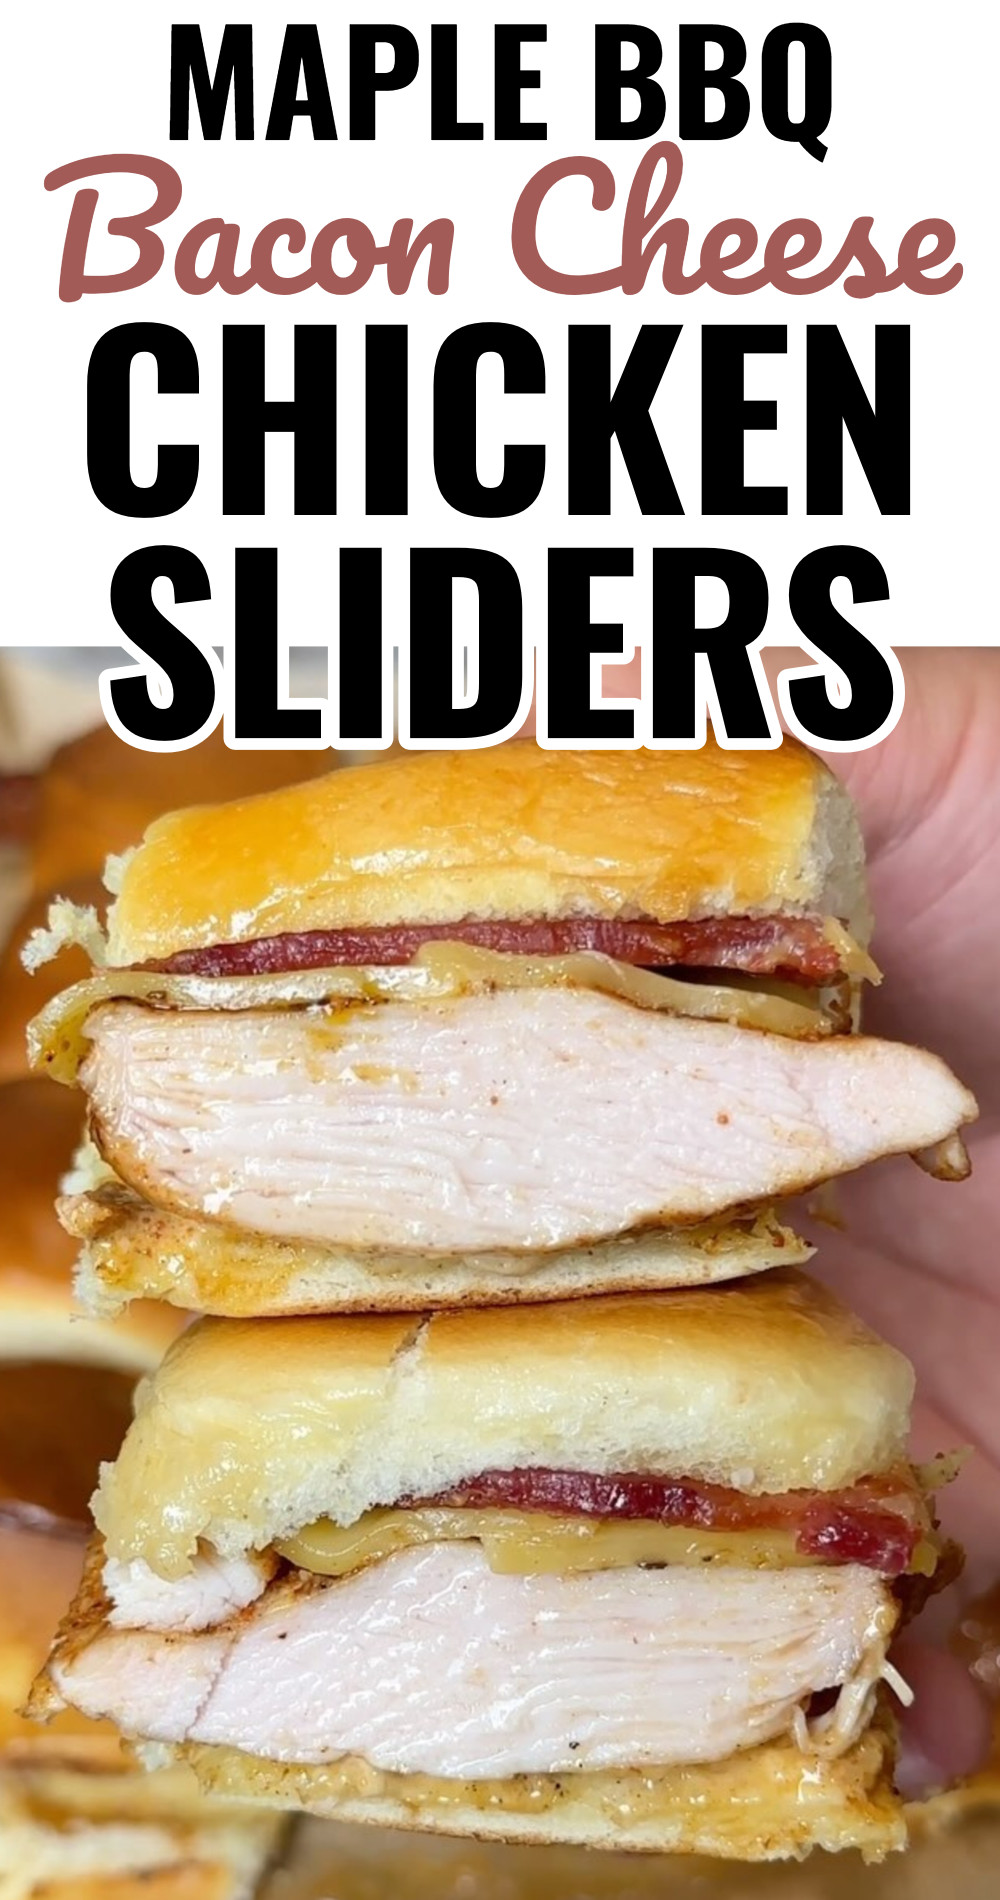 Maple BBQ Bacon Cheese Chicken Sliders Party Sandwich Recipe